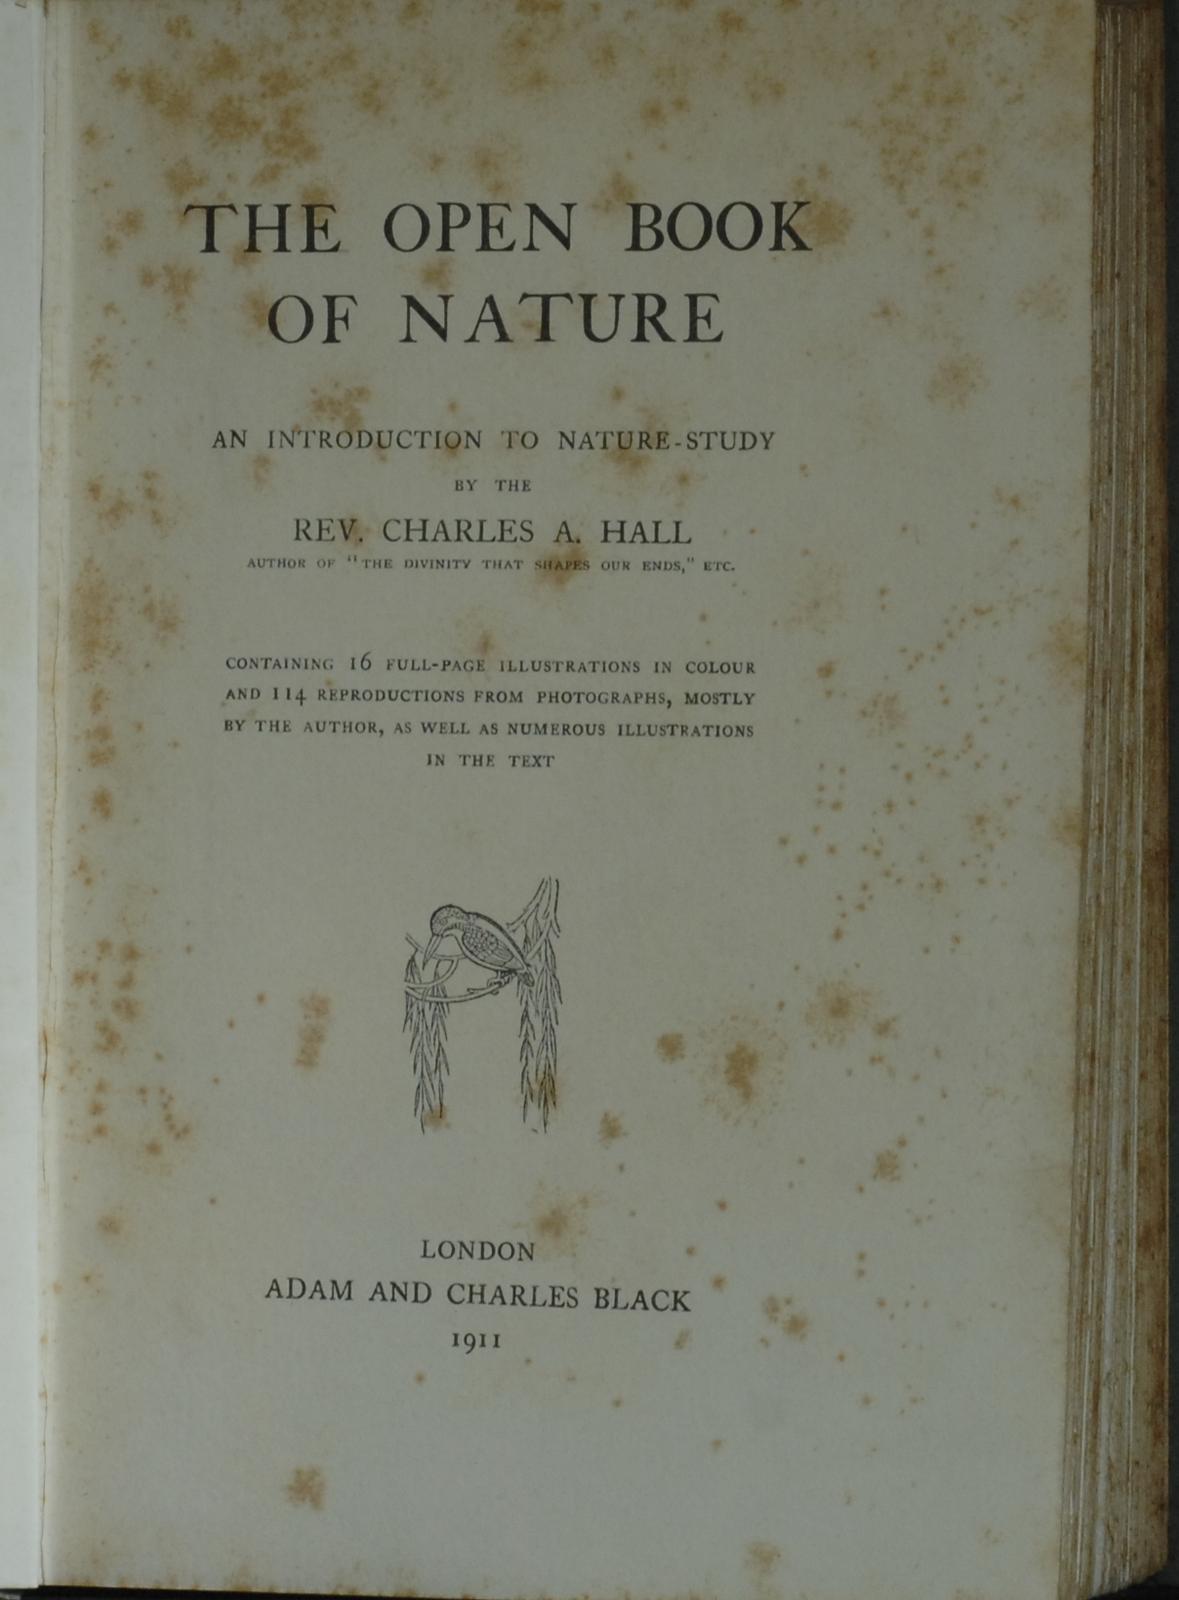 mbb006733b_-_Hall_Rev_Charles_A_-_The_Open_Book_Of_Nature.An_Introduction_To_Nature_Study_-_Contains_Illustrations.jpg